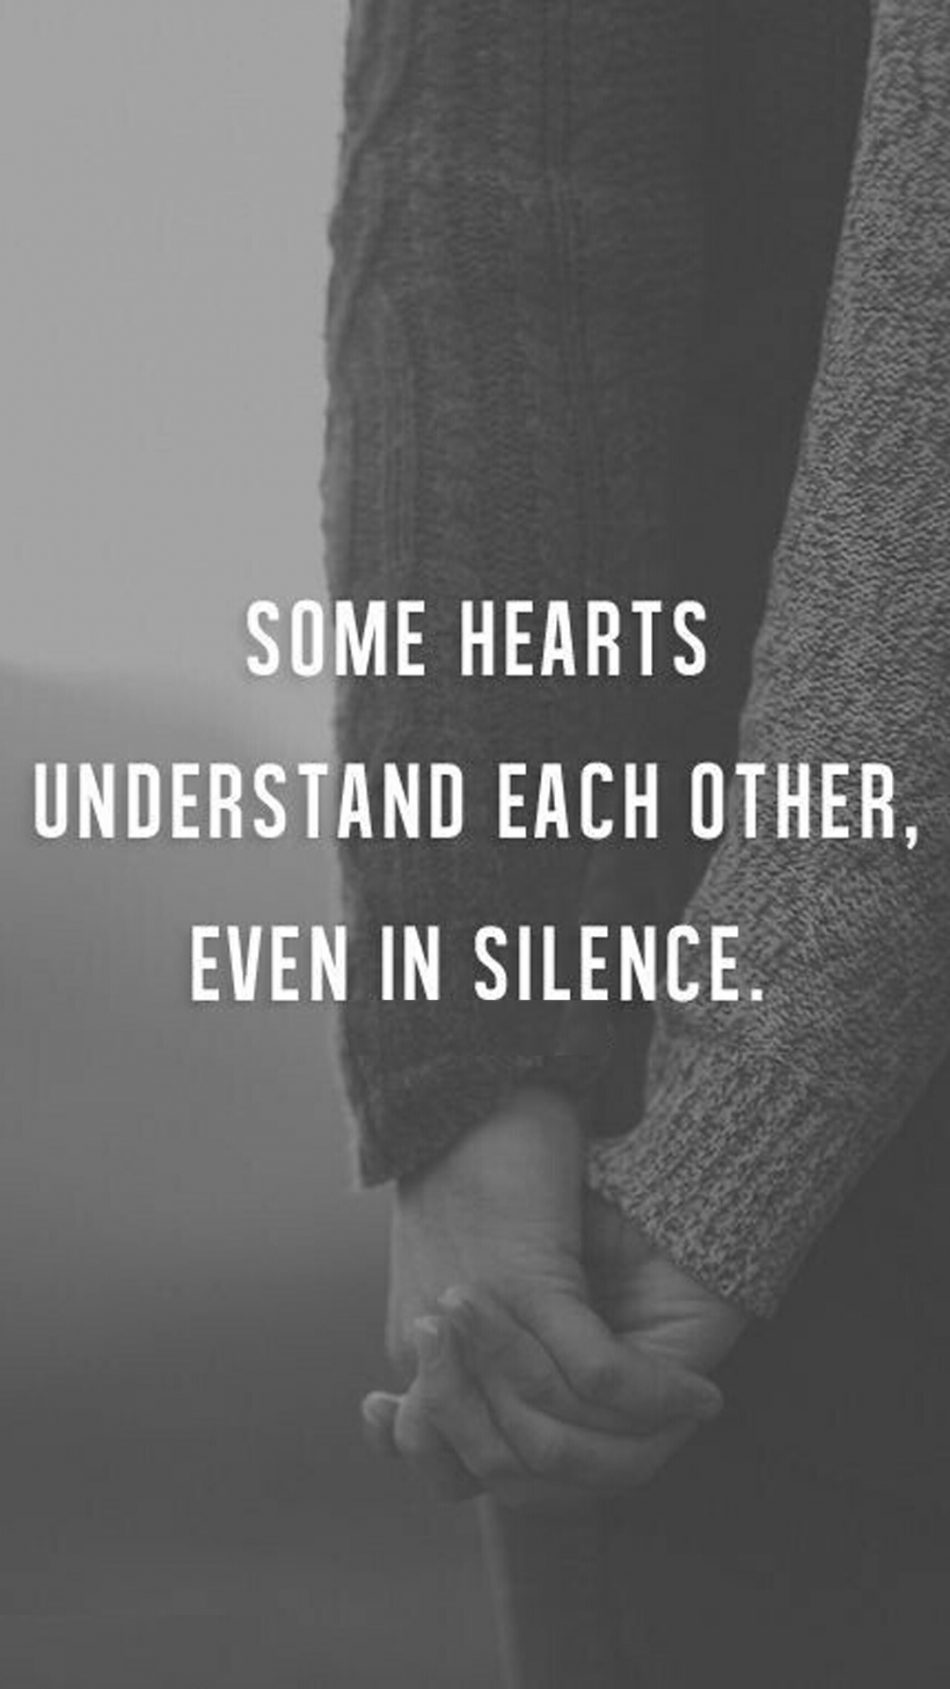 Some Hearts Understand Each Other Quote 4K Ultra HD Mobile Wallpaper